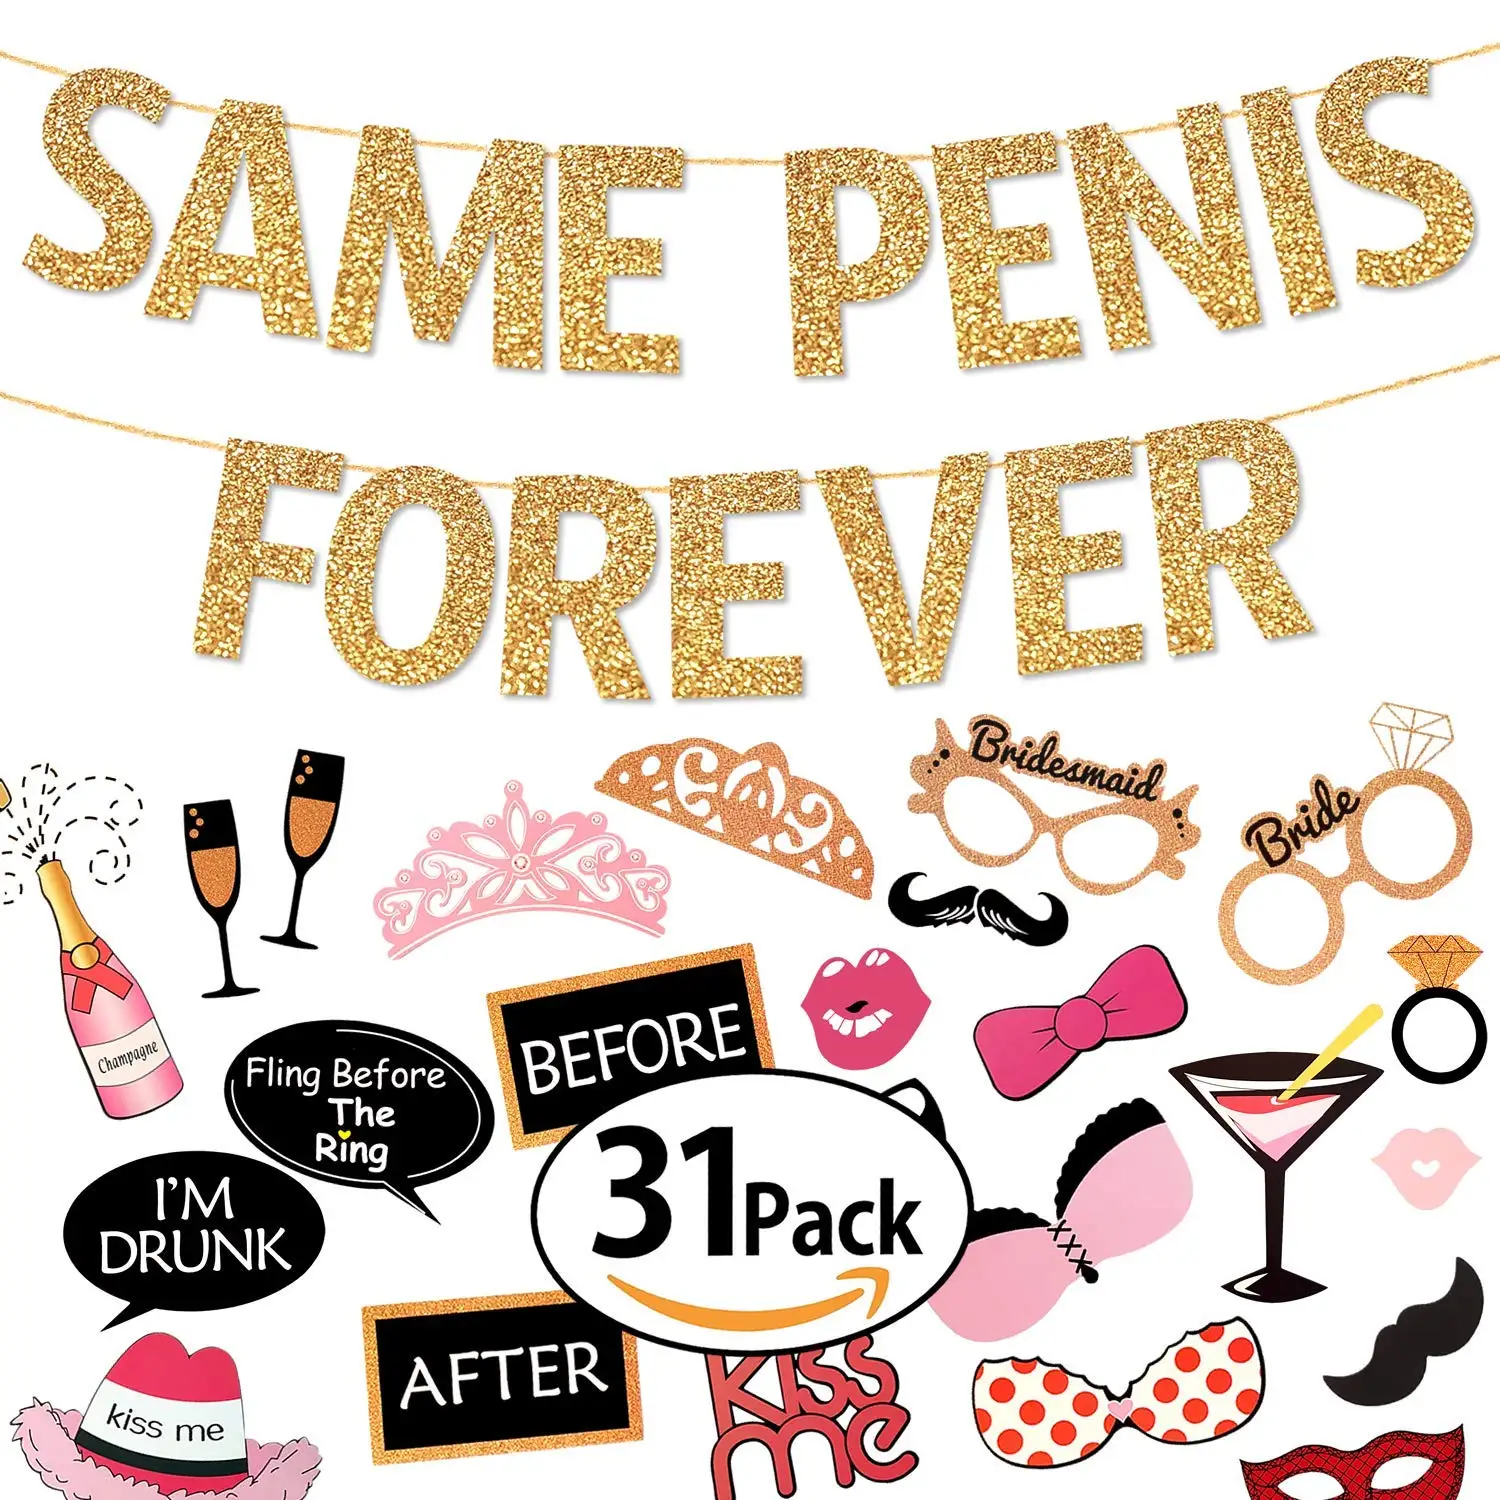 BEFORE AND AFTER Hens Night Photo Booth Props 33 Pack